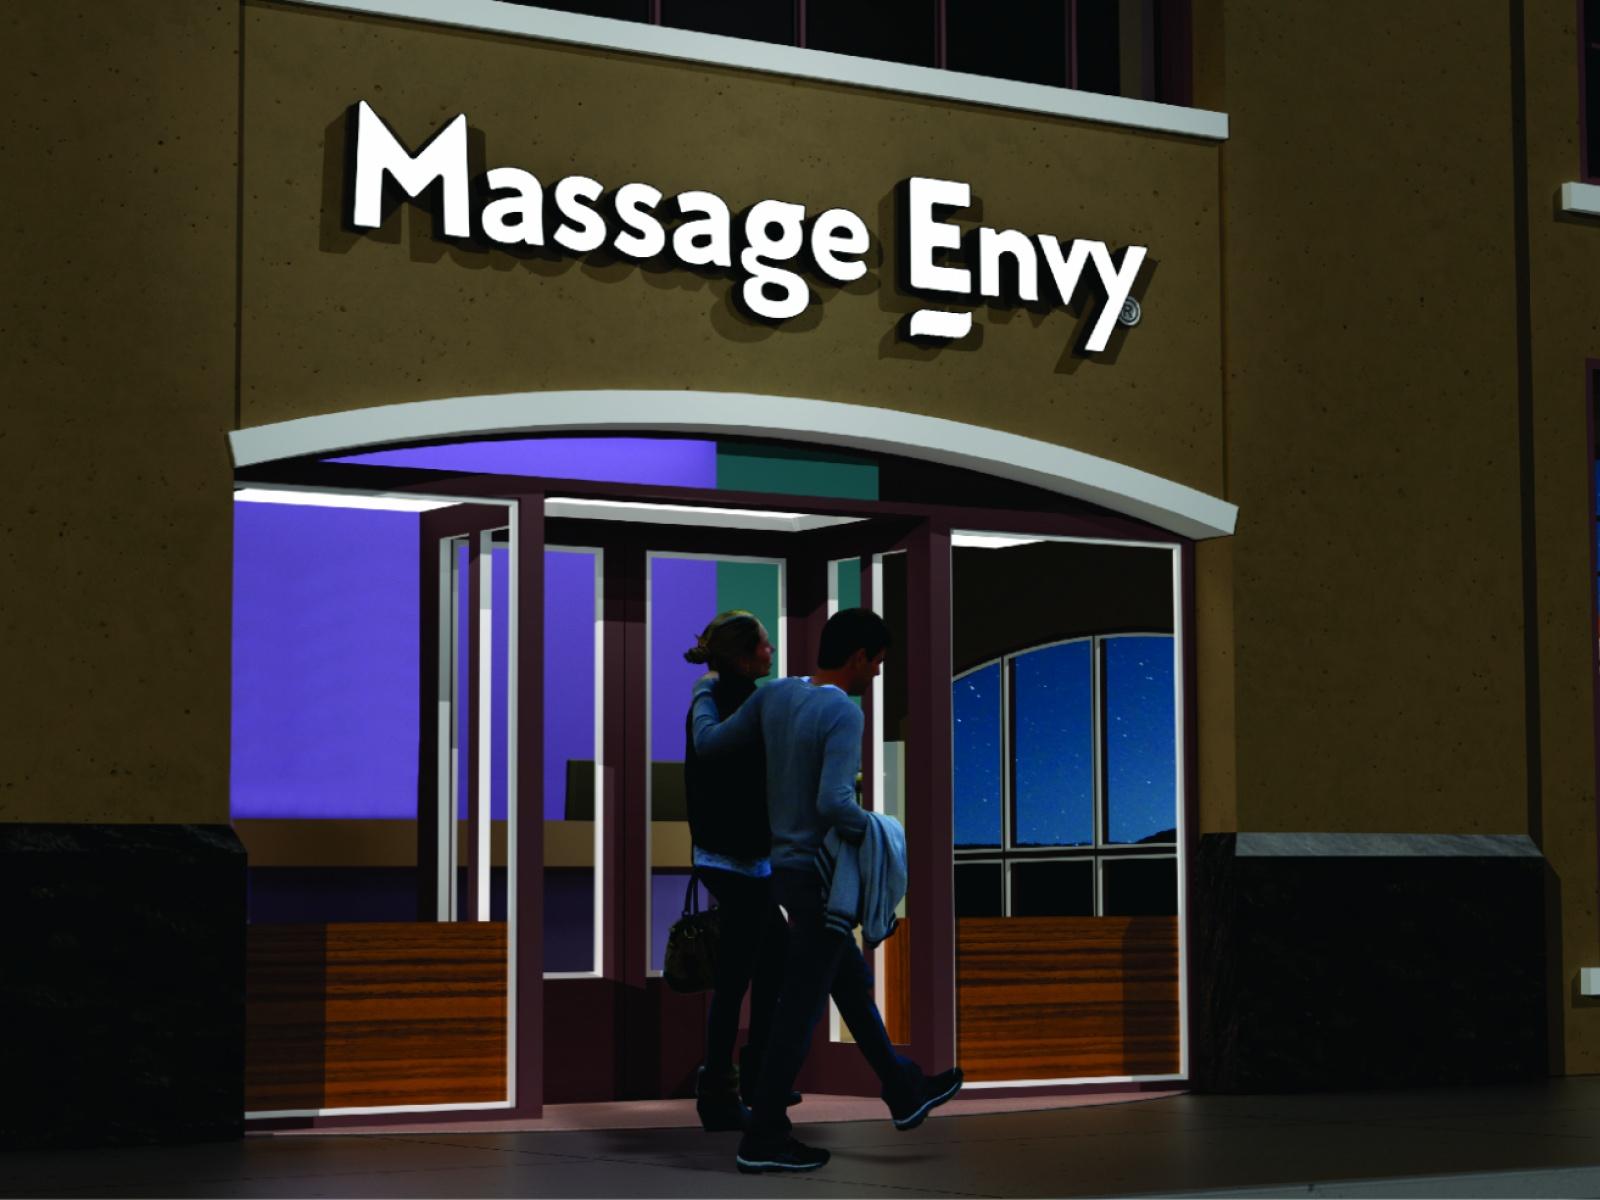 Massage Envy - Priority Branded Environments